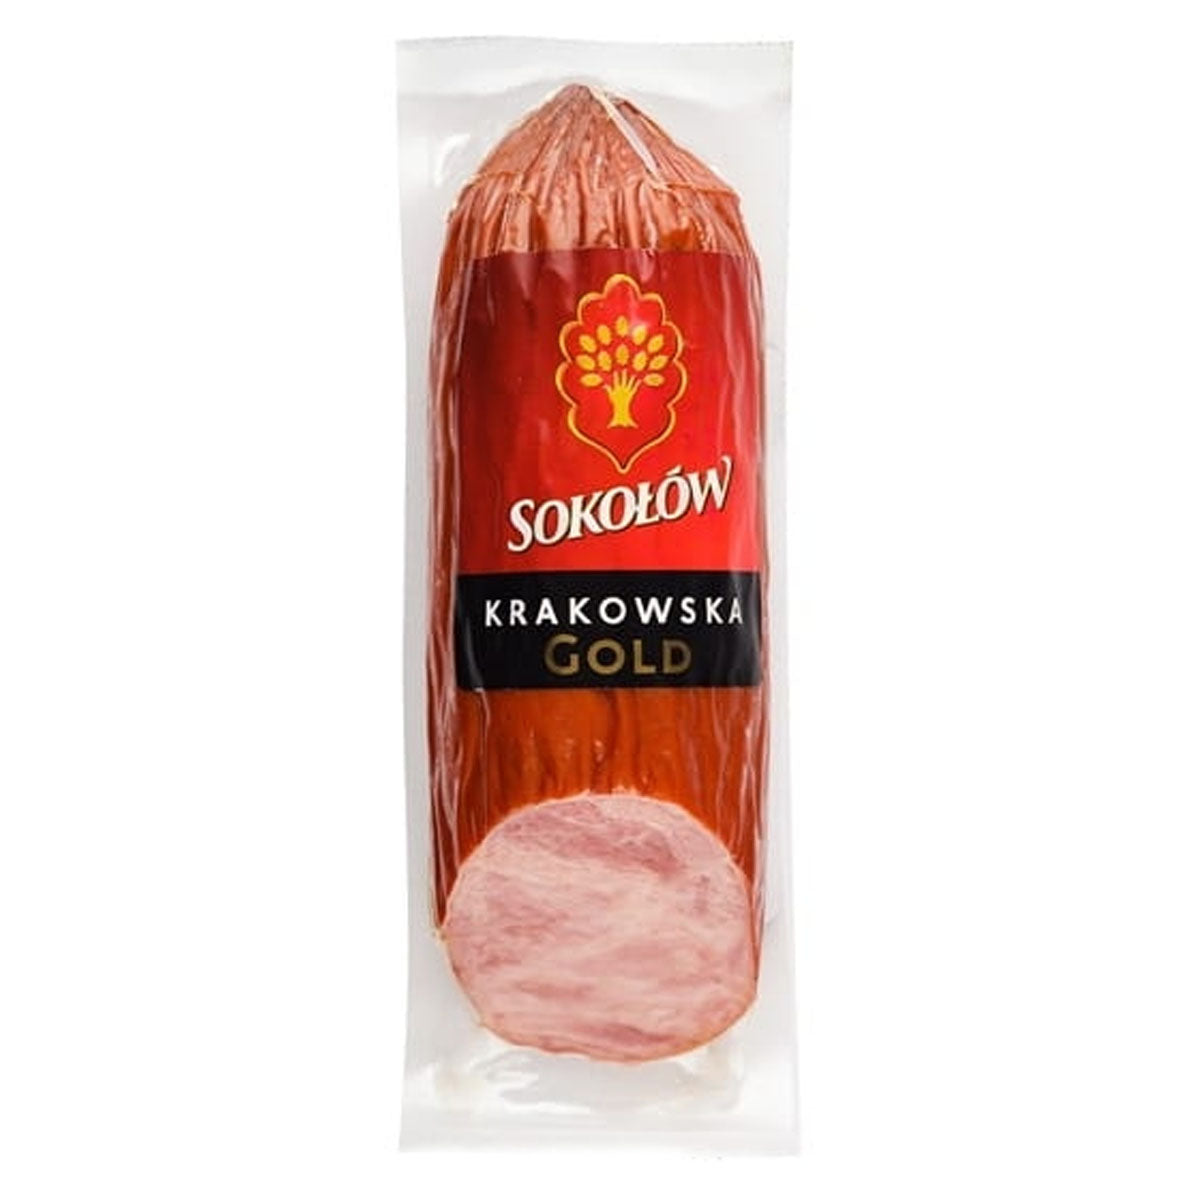 Sokolow - Dry Sausage - 345g - Continental Food Store